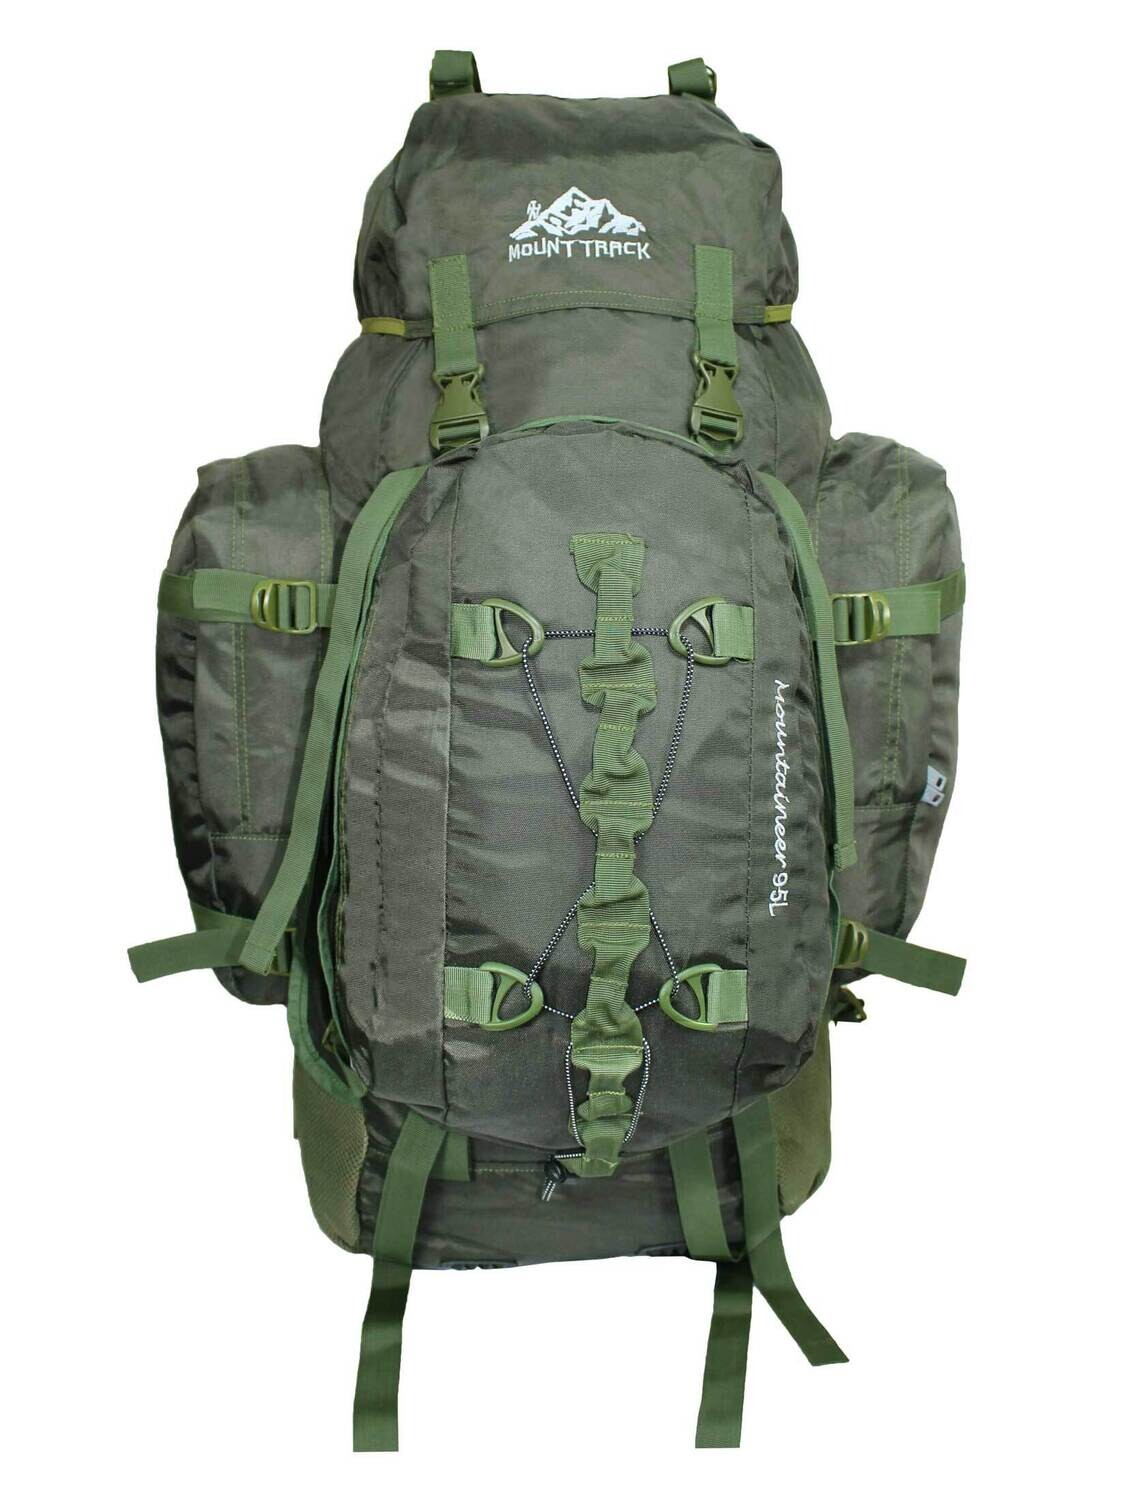 Mount Track Expedition 95 litres Rucksack with Detachable Day Pack & Rain Cover